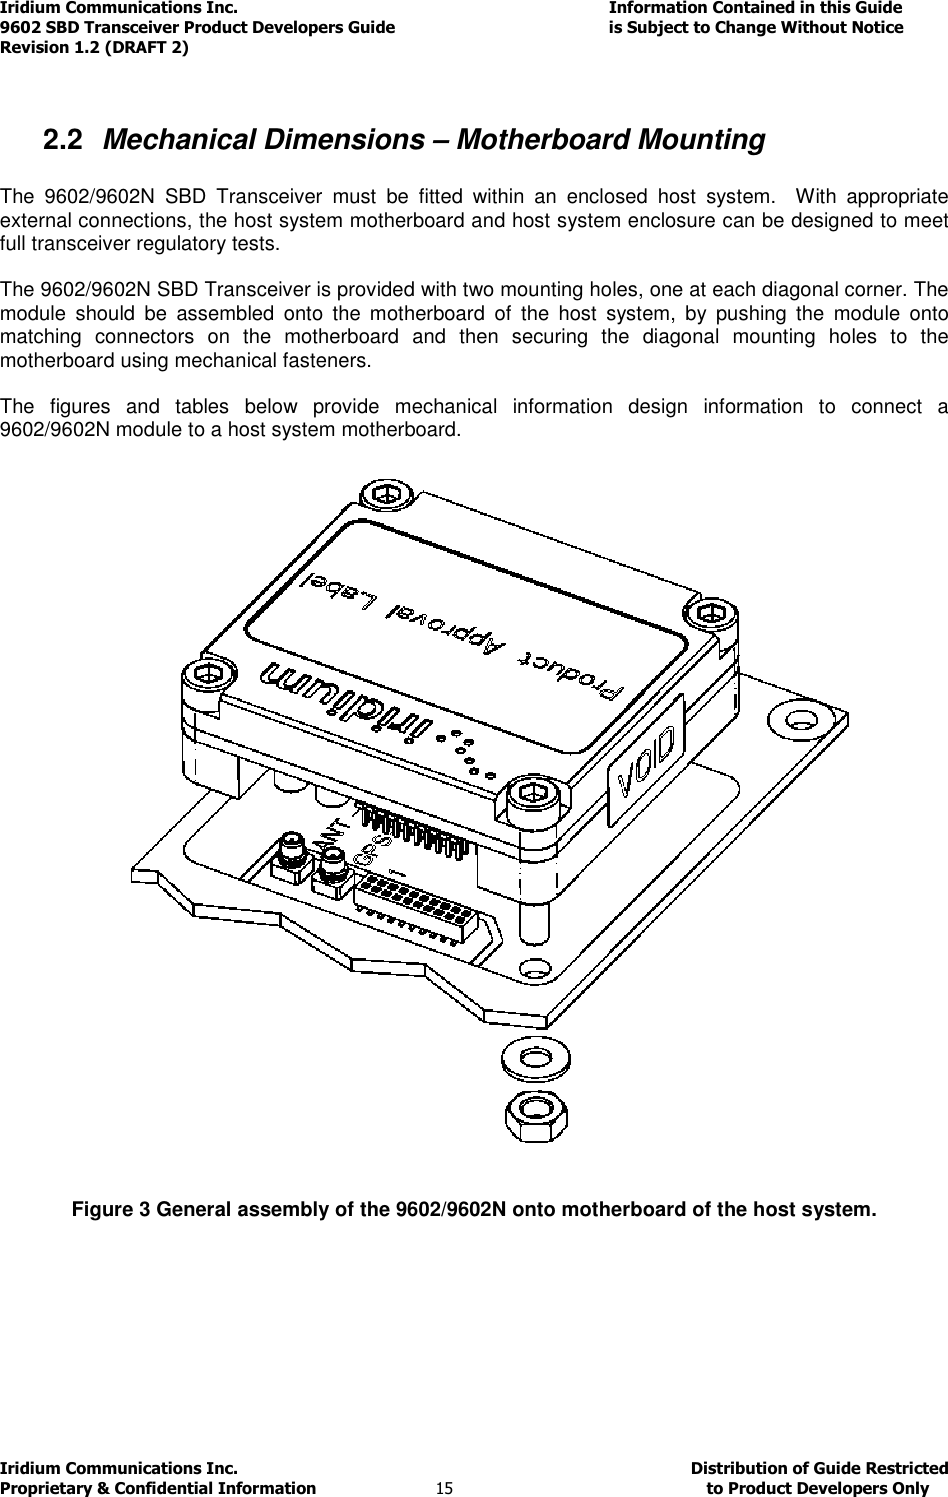 Iridium Communications Inc.                                      Information Contained in this Guide  9602 SBD Transceiver Product Developers Guide                                             is Subject to Change Without Notice  Revision 1.2 (DRAFT 2) Iridium Communications Inc.                                           Distribution of Guide Restricted Proprietary &amp; Confidential Information                         15                                                  to Product Developers Only            2.2  Mechanical Dimensions – Motherboard Mounting  The  9602/9602N  SBD  Transceiver  must  be  fitted  within  an  enclosed  host  system.    With  appropriate external connections, the host system motherboard and host system enclosure can be designed to meet full transceiver regulatory tests.  The 9602/9602N SBD Transceiver is provided with two mounting holes, one at each diagonal corner. The module  should  be  assembled  onto  the  motherboard  of  the  host  system,  by  pushing  the  module  onto matching  connectors  on  the  motherboard  and  then  securing  the  diagonal  mounting  holes  to  the motherboard using mechanical fasteners.  The  figures  and  tables  below  provide  mechanical  information  design  information  to  connect  a 9602/9602N module to a host system motherboard.              Figure 3 General assembly of the 9602/9602N onto motherboard of the host system. 